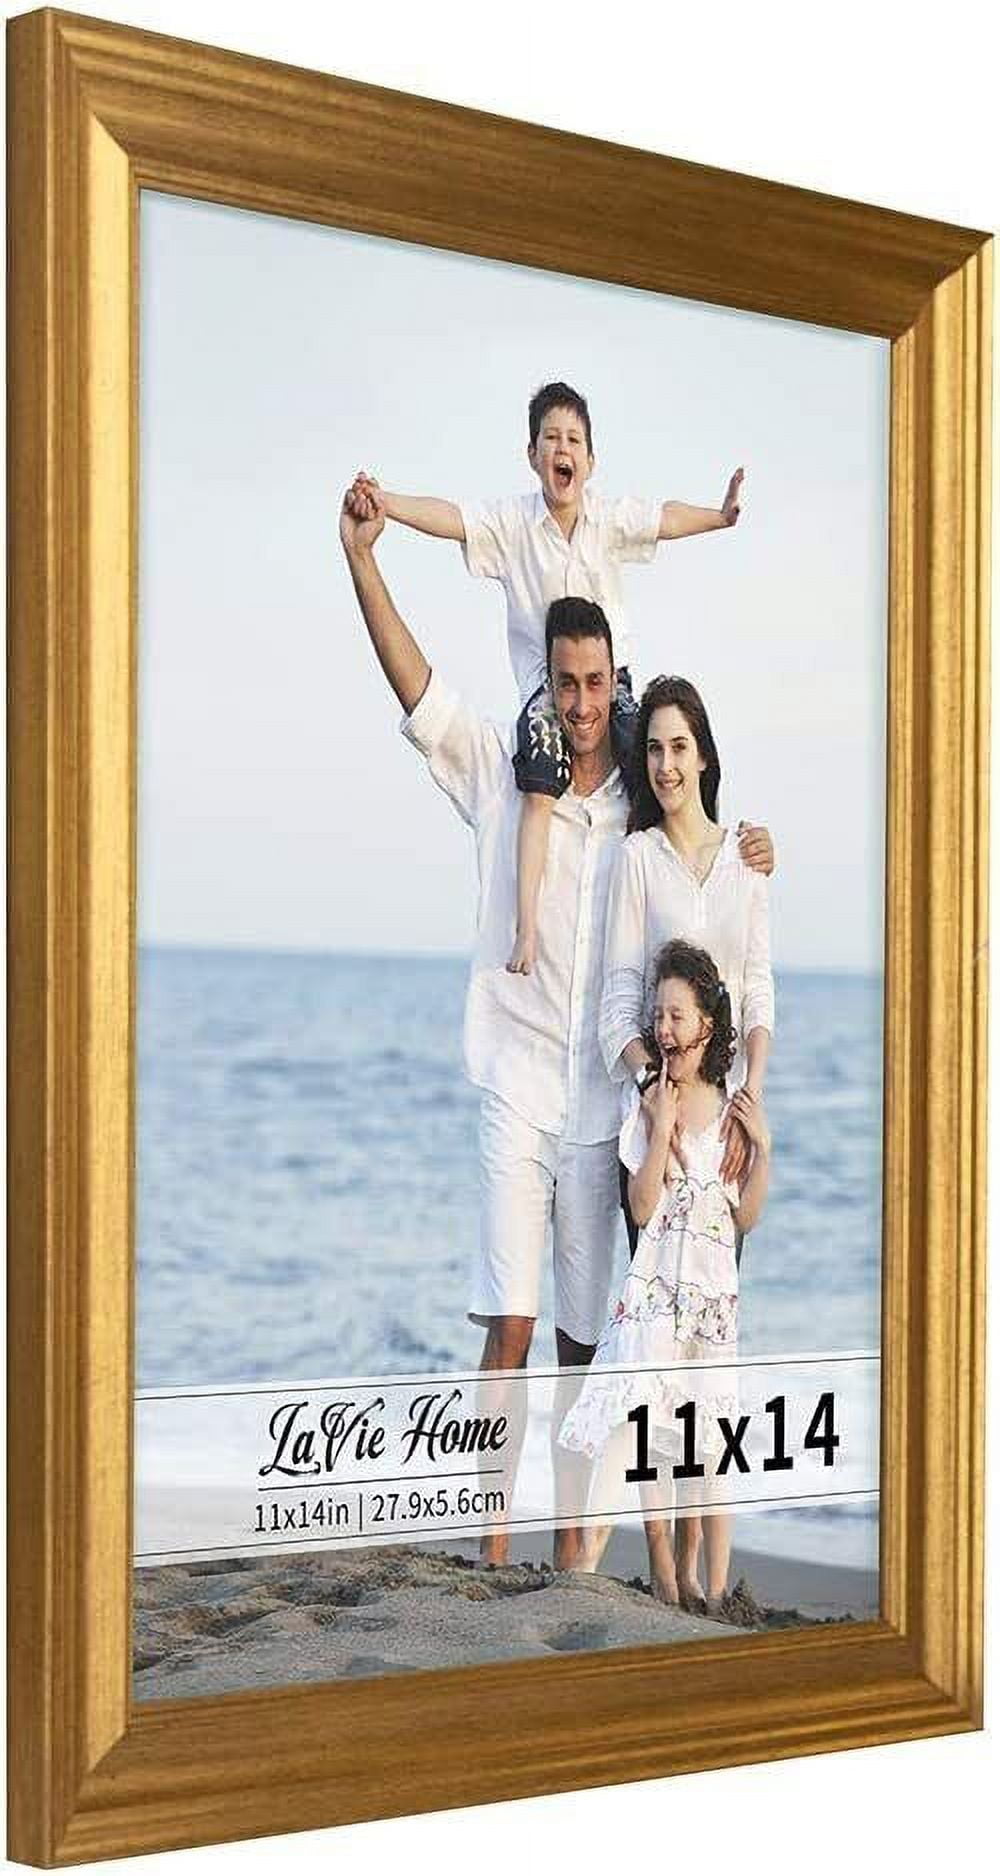 LaVie Home 11x14 Graduation Signable Picture Frame Black, 11x14 Frame Wood  Displays 5x7 Pictures with Mat, for Wedding Graduation Birthday Retirement